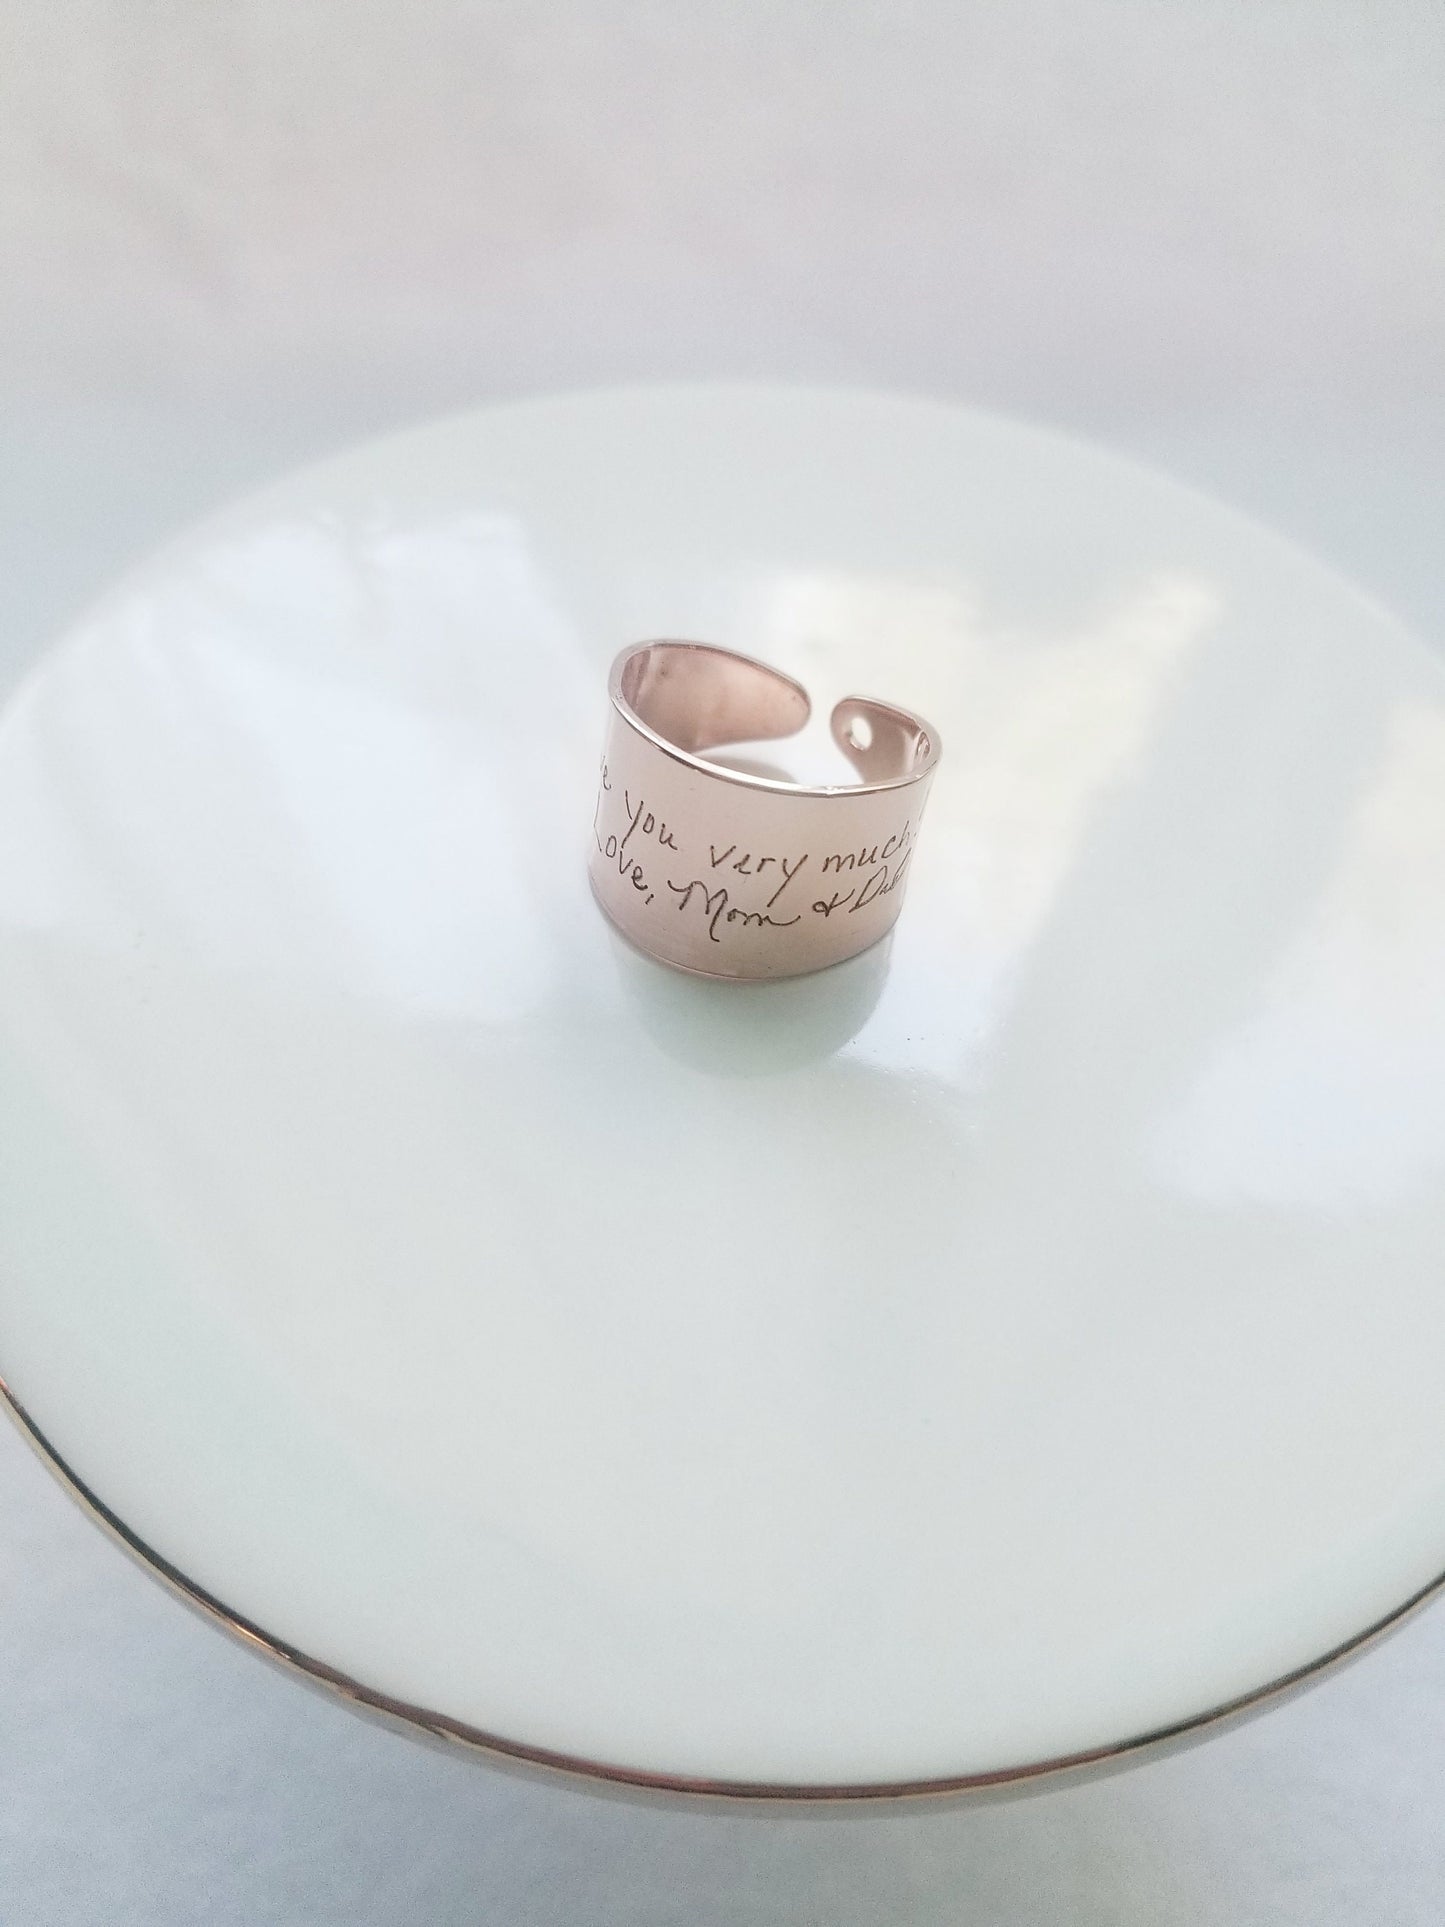 Custom, adjustable and Personalized engraved ring in gold/silver/rose gold